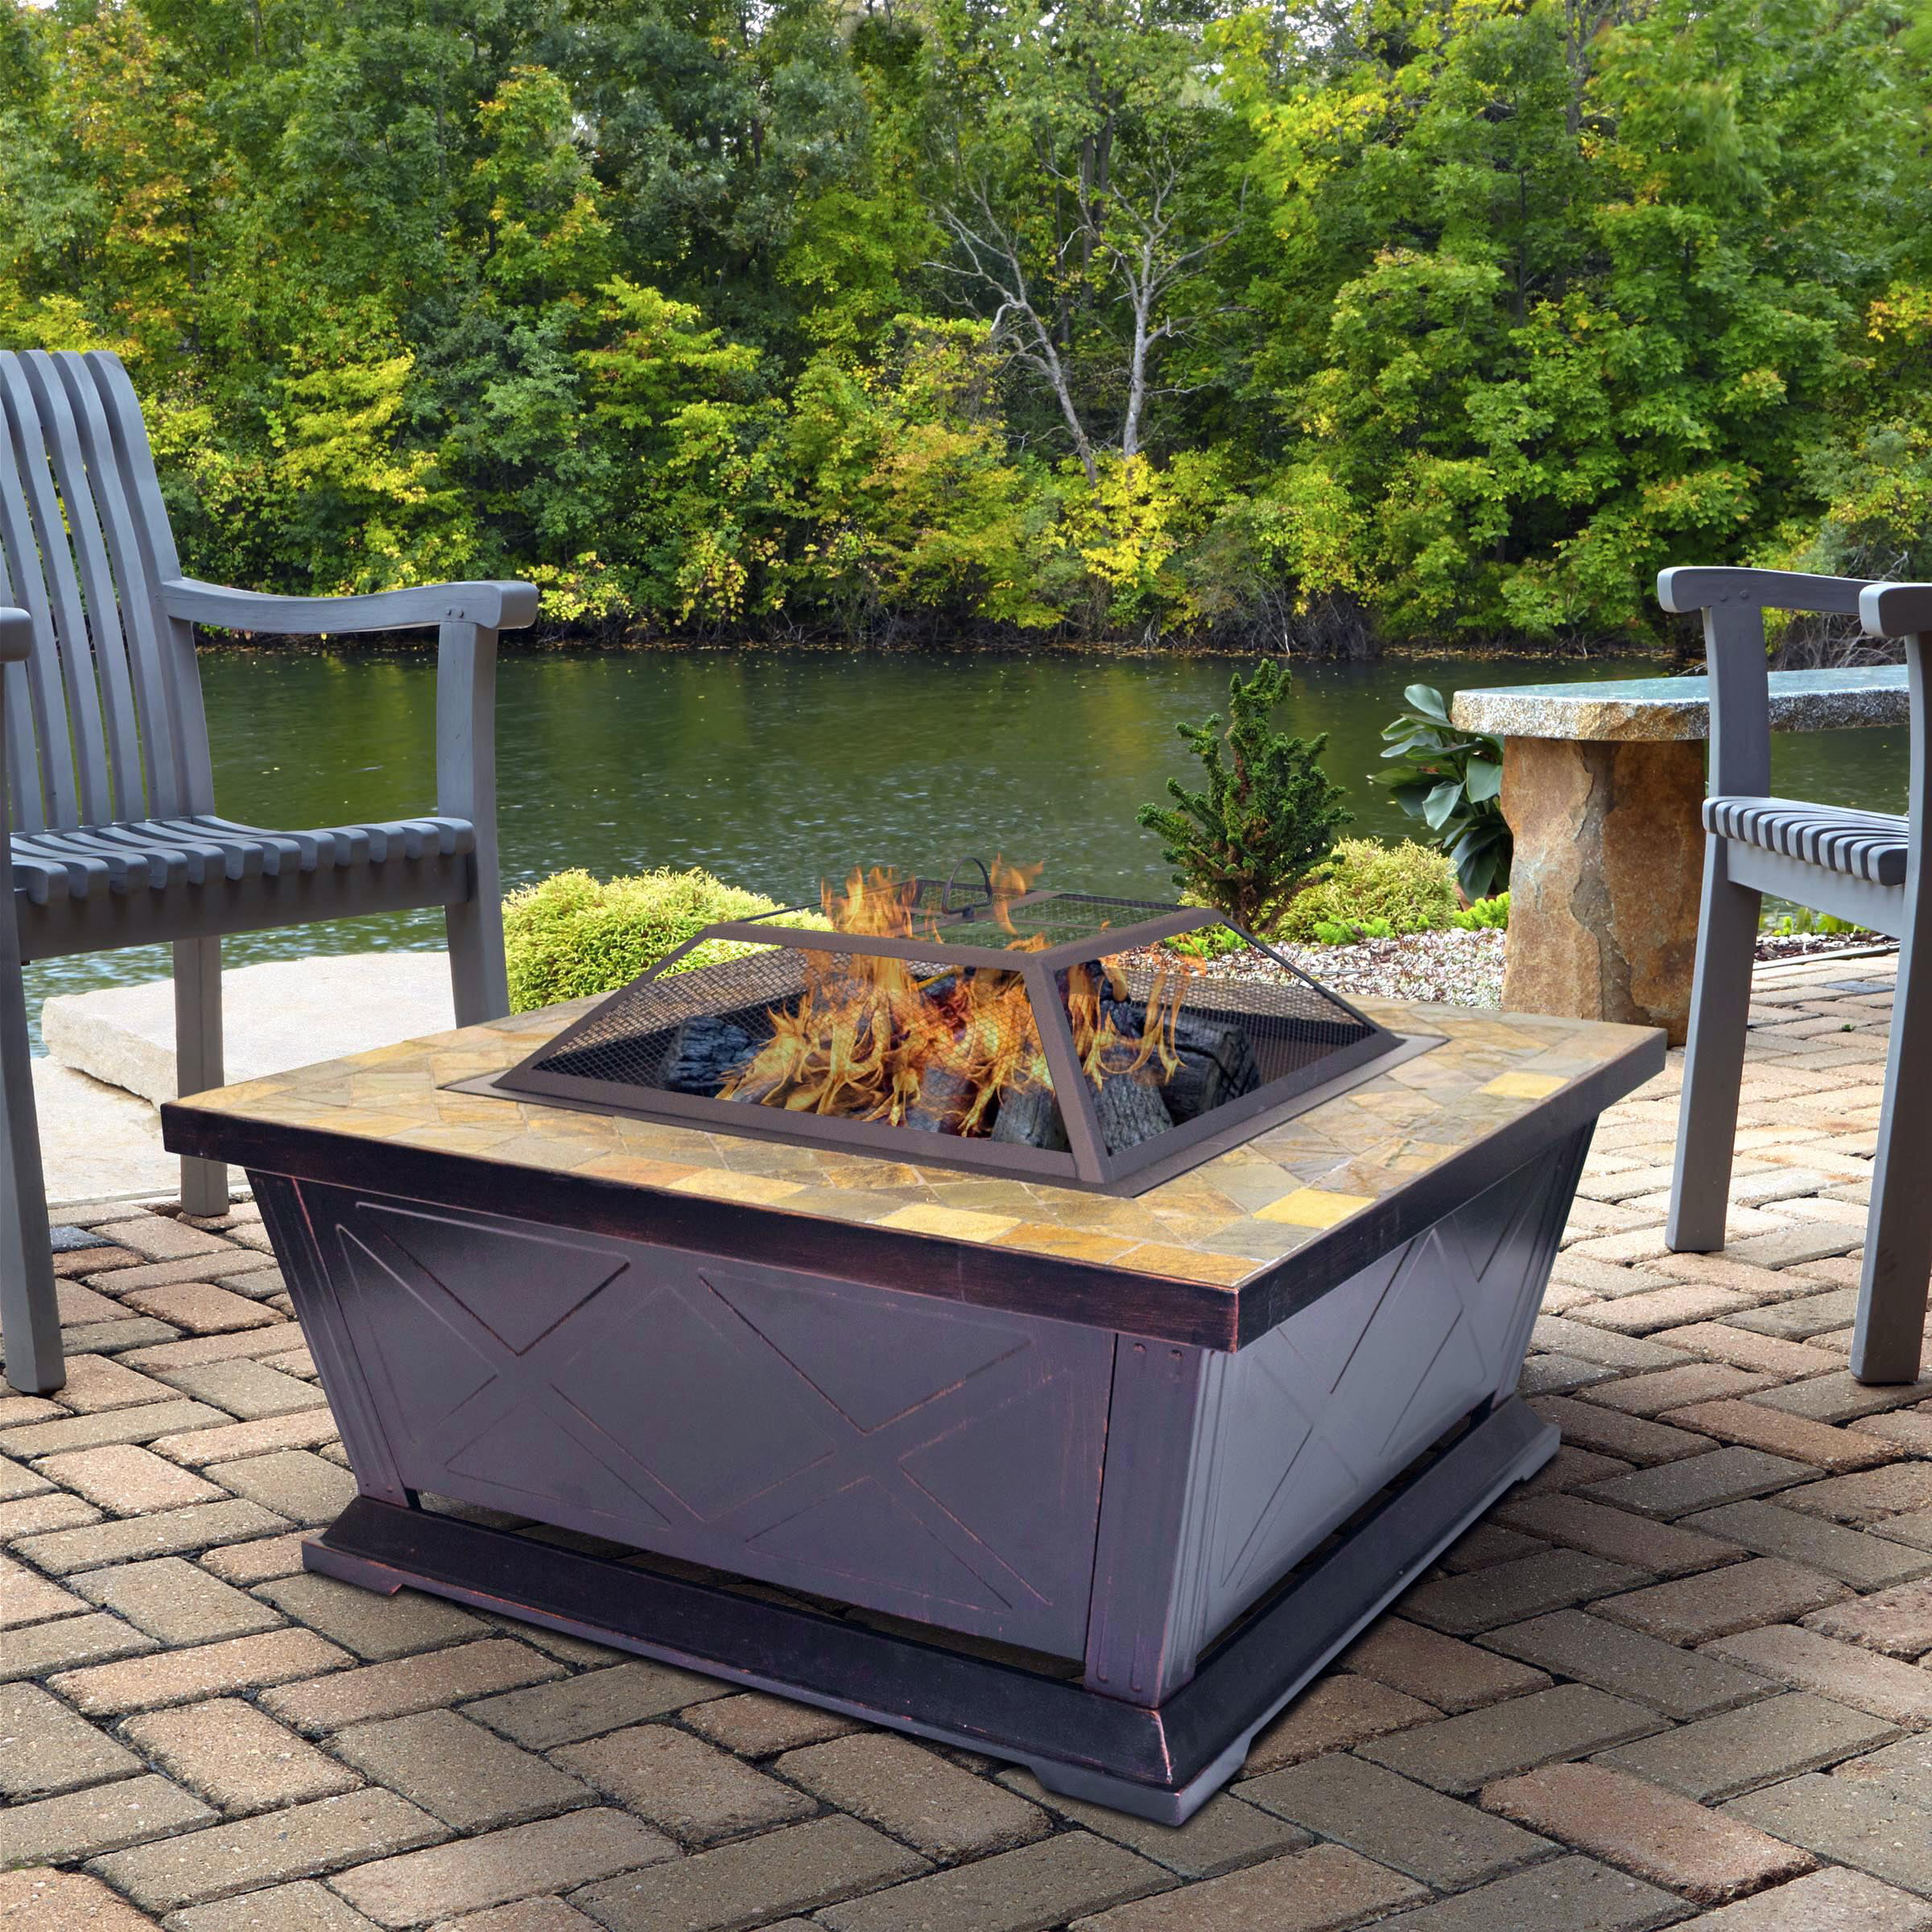 Outdoor Leisure Products 36 inch Square Steel Fire Pit with Decorative  Slate Hearth and Oil Rubbed Bronze Finish - Walmart.com